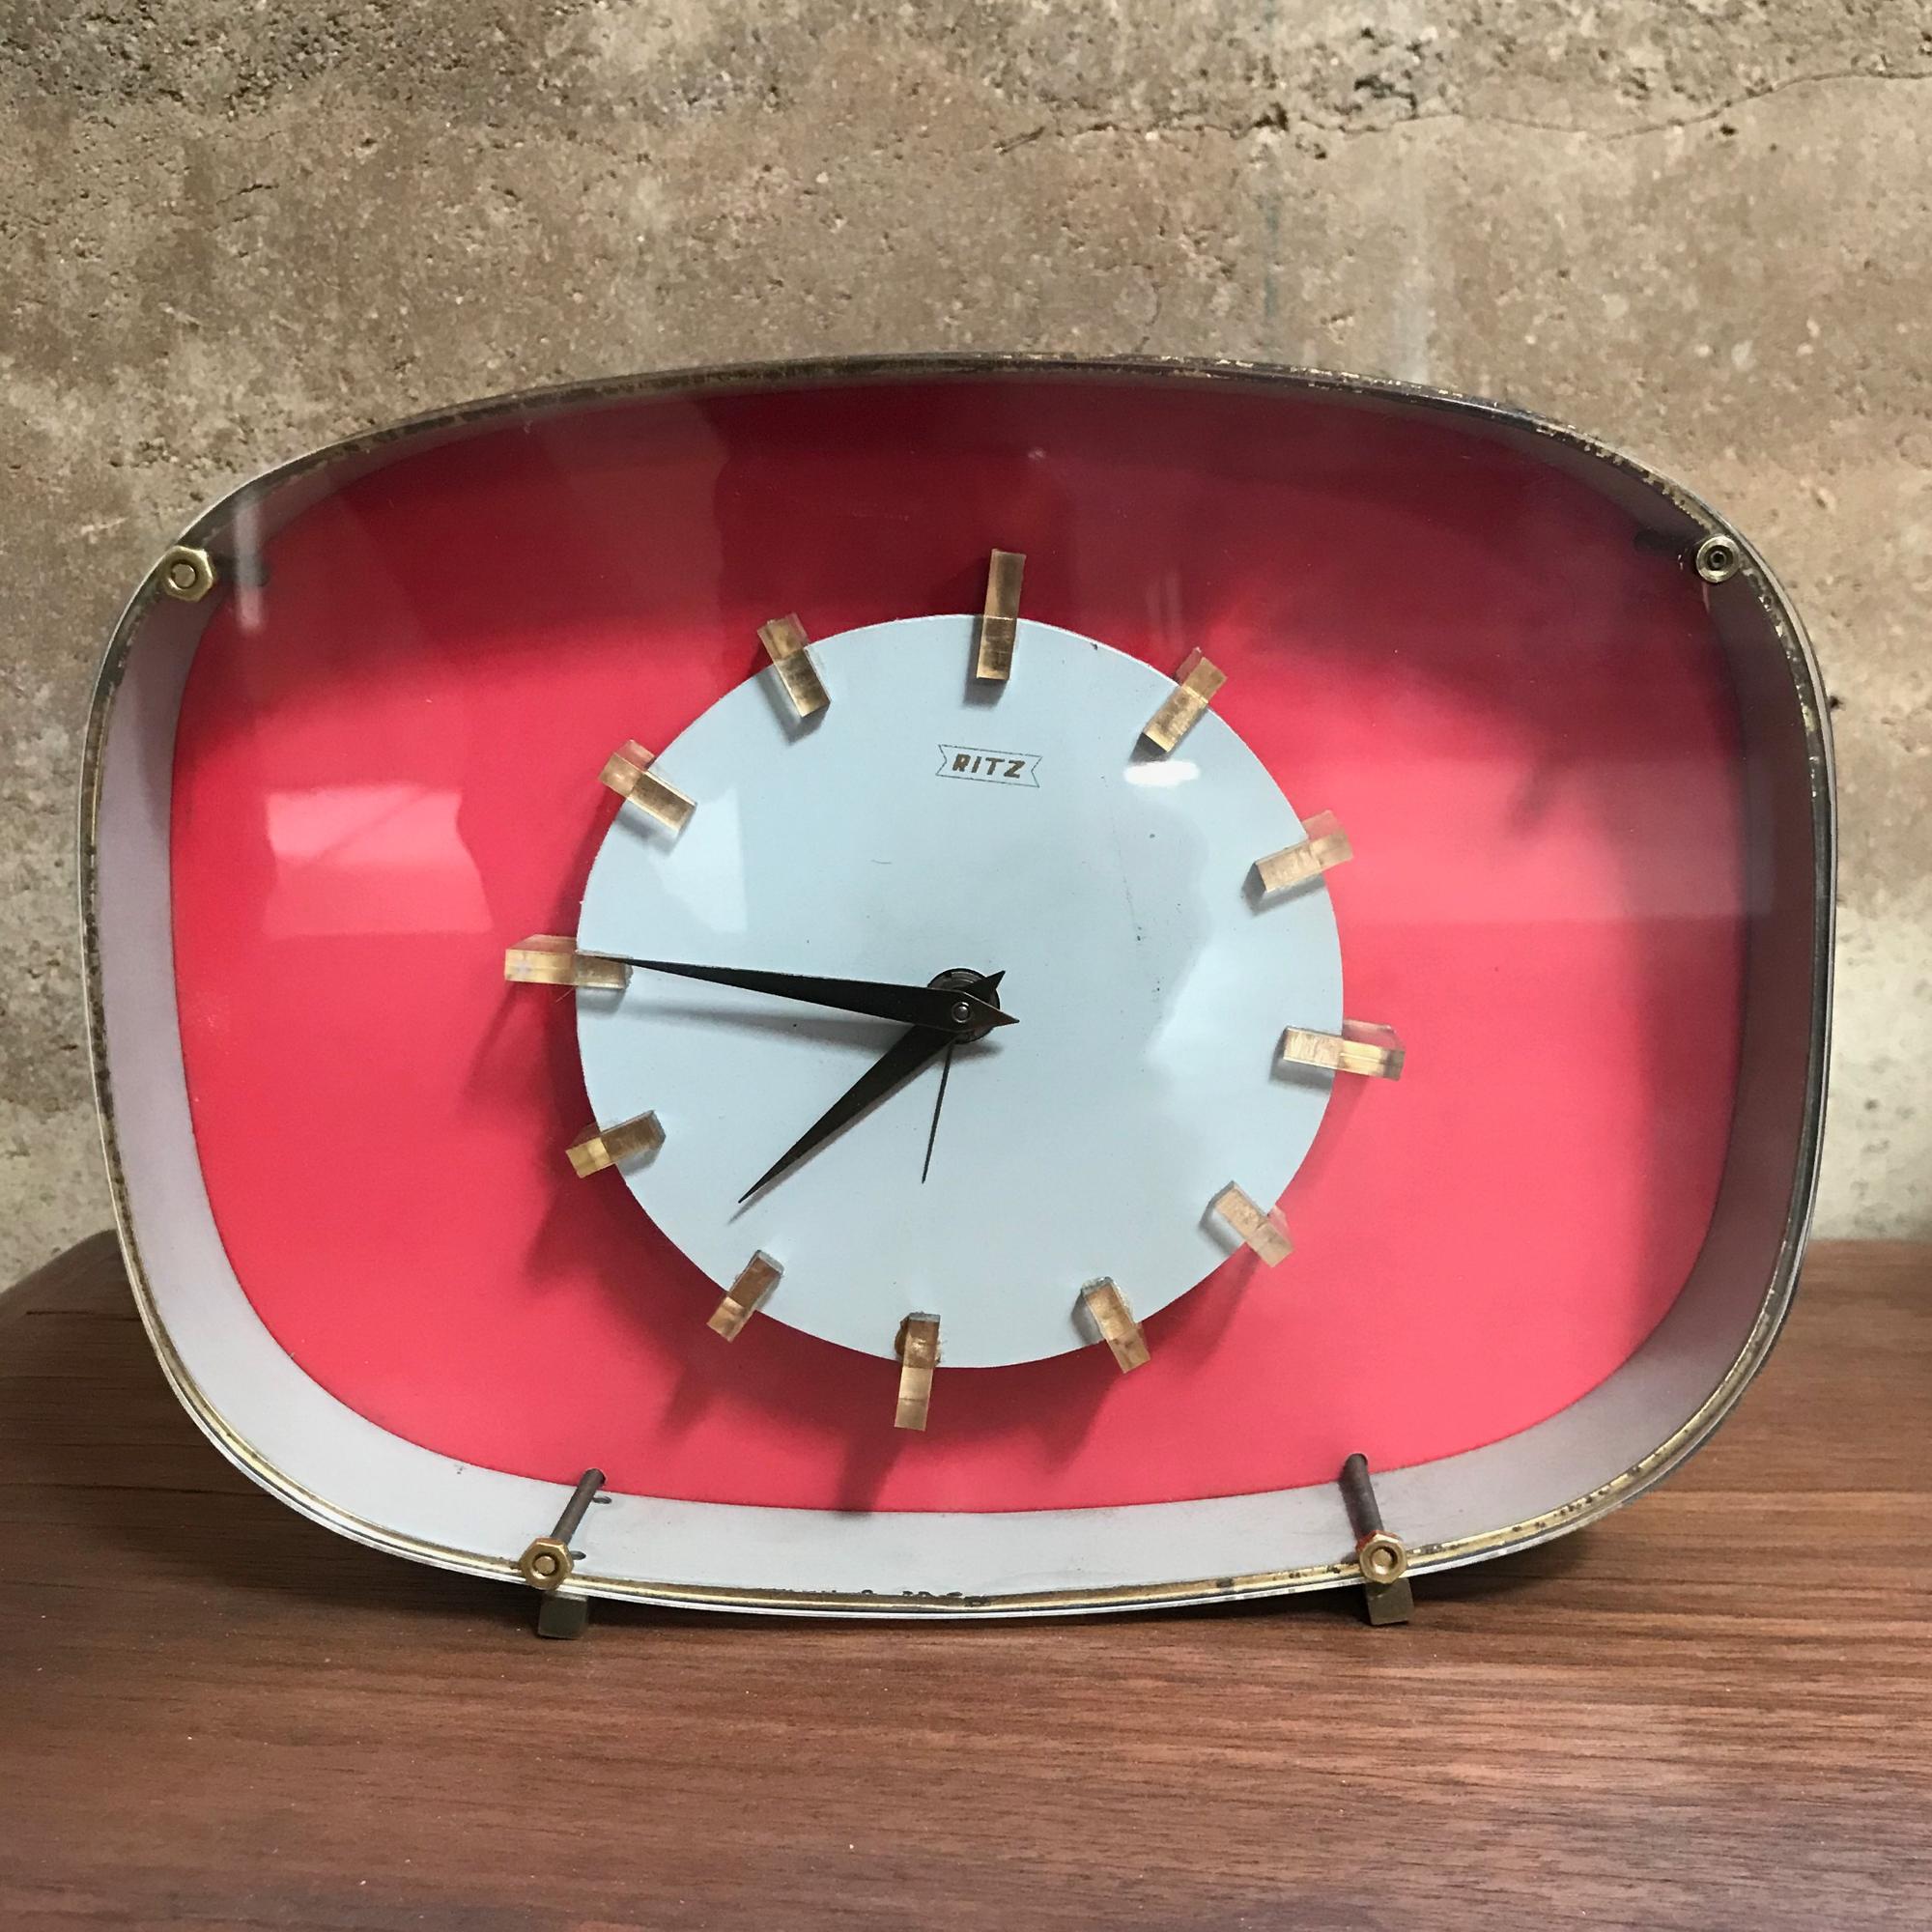 For your consideration: Art Deco fabulous pink vintage table clock by RITZ, made Italy, 1960s

Mechanical wind up alarm desk clock

Colors of pink salmon, white, black, and gold in brass and Lucite plexiglass.

Time markers have Lucite trim.

Table